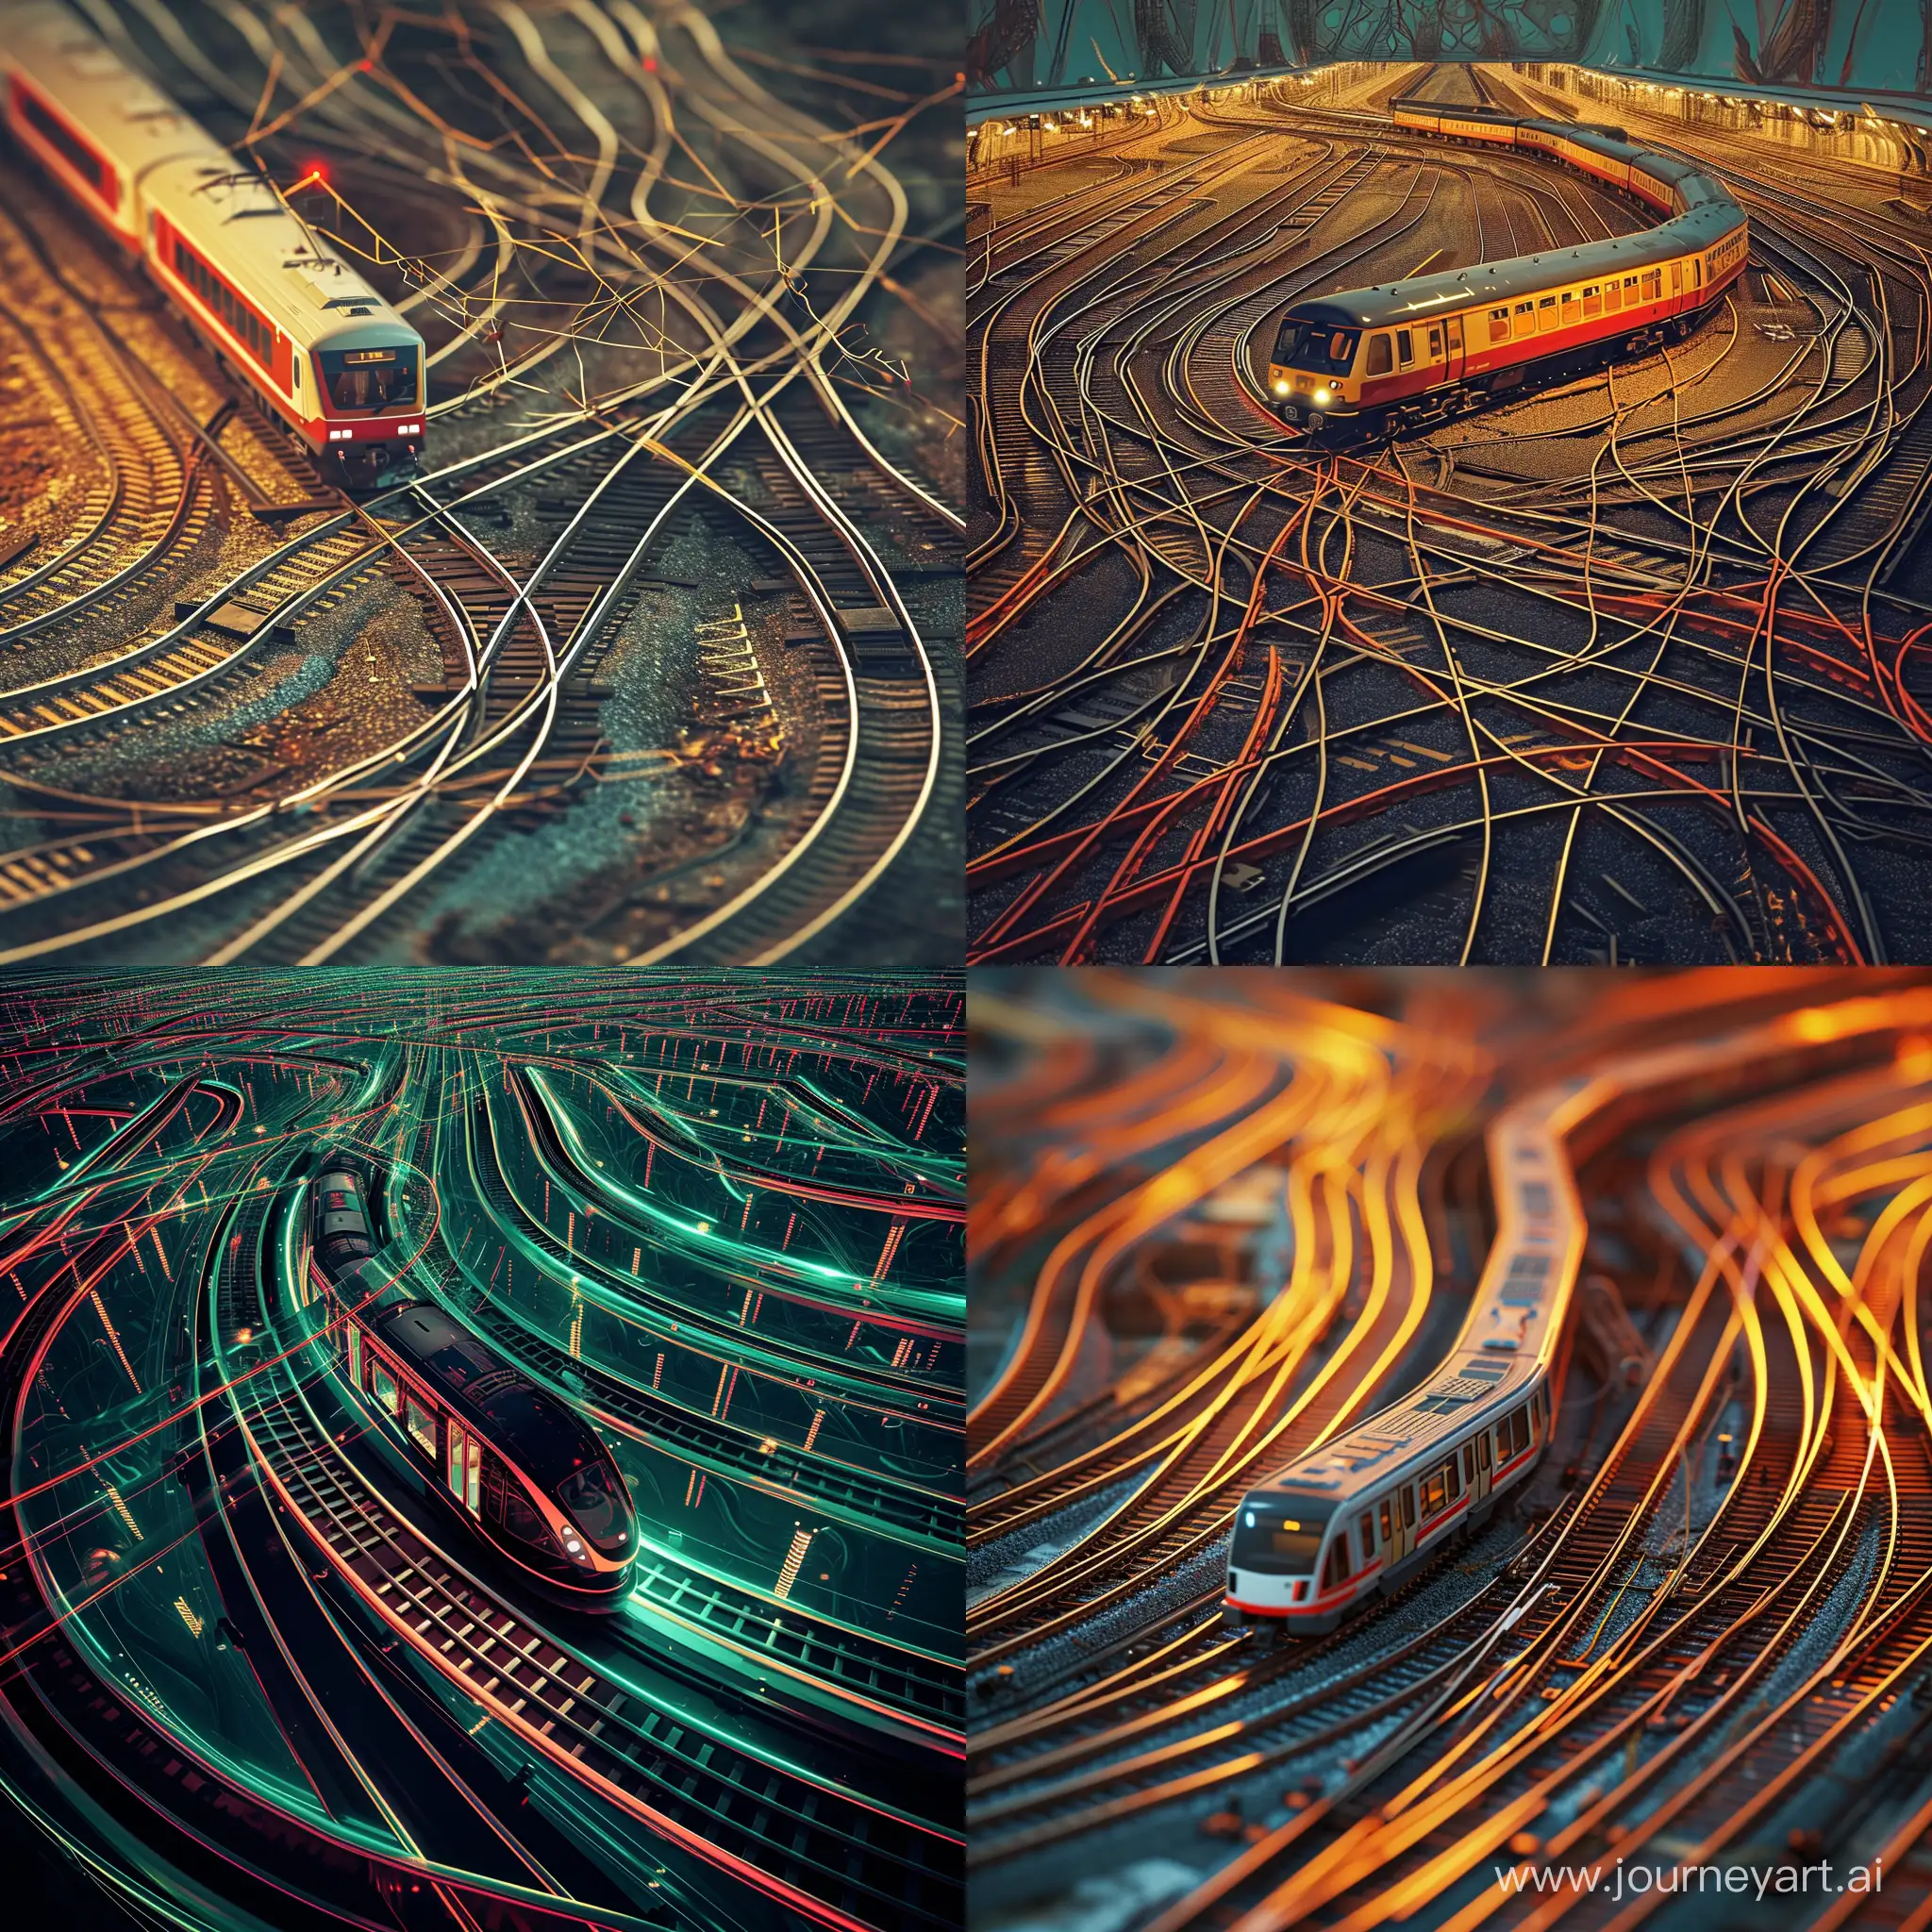 A stylized image of a train navigating a complex network of tracks, representing the challenge of finding relevant data within an organization